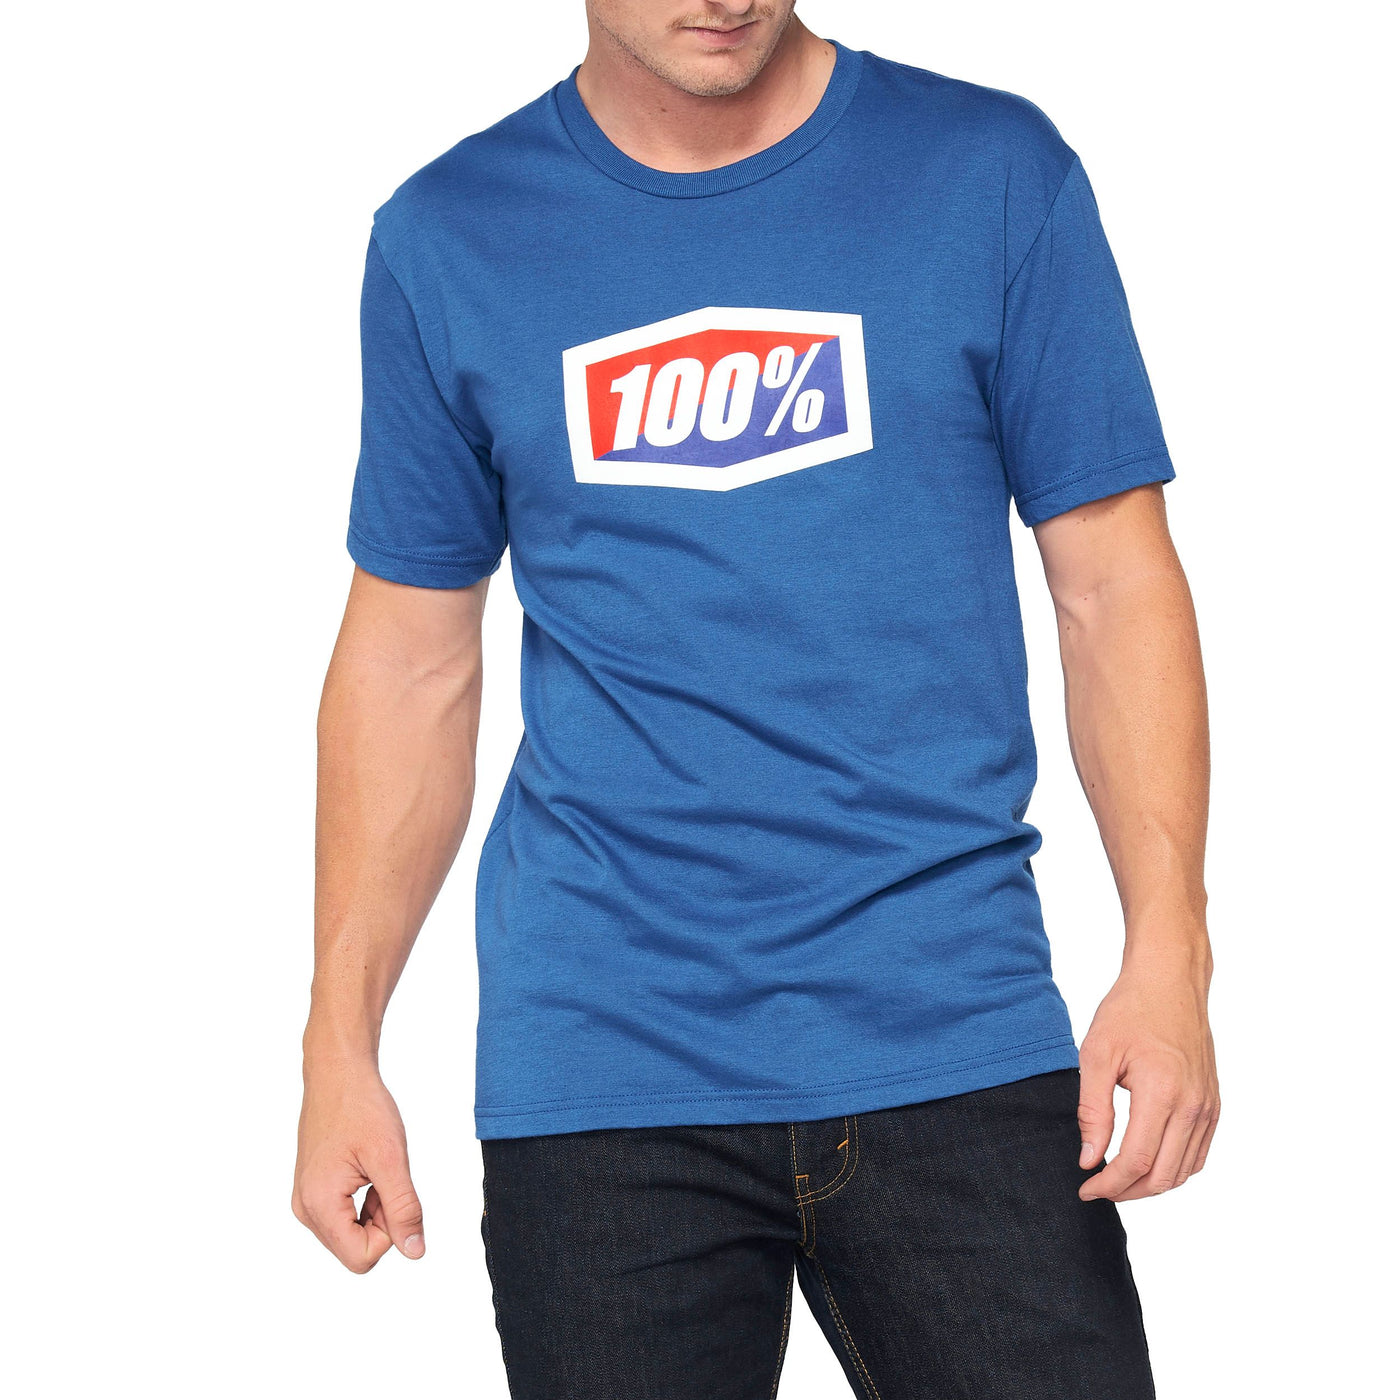 100% - OFFICIAL TEE - BLUE